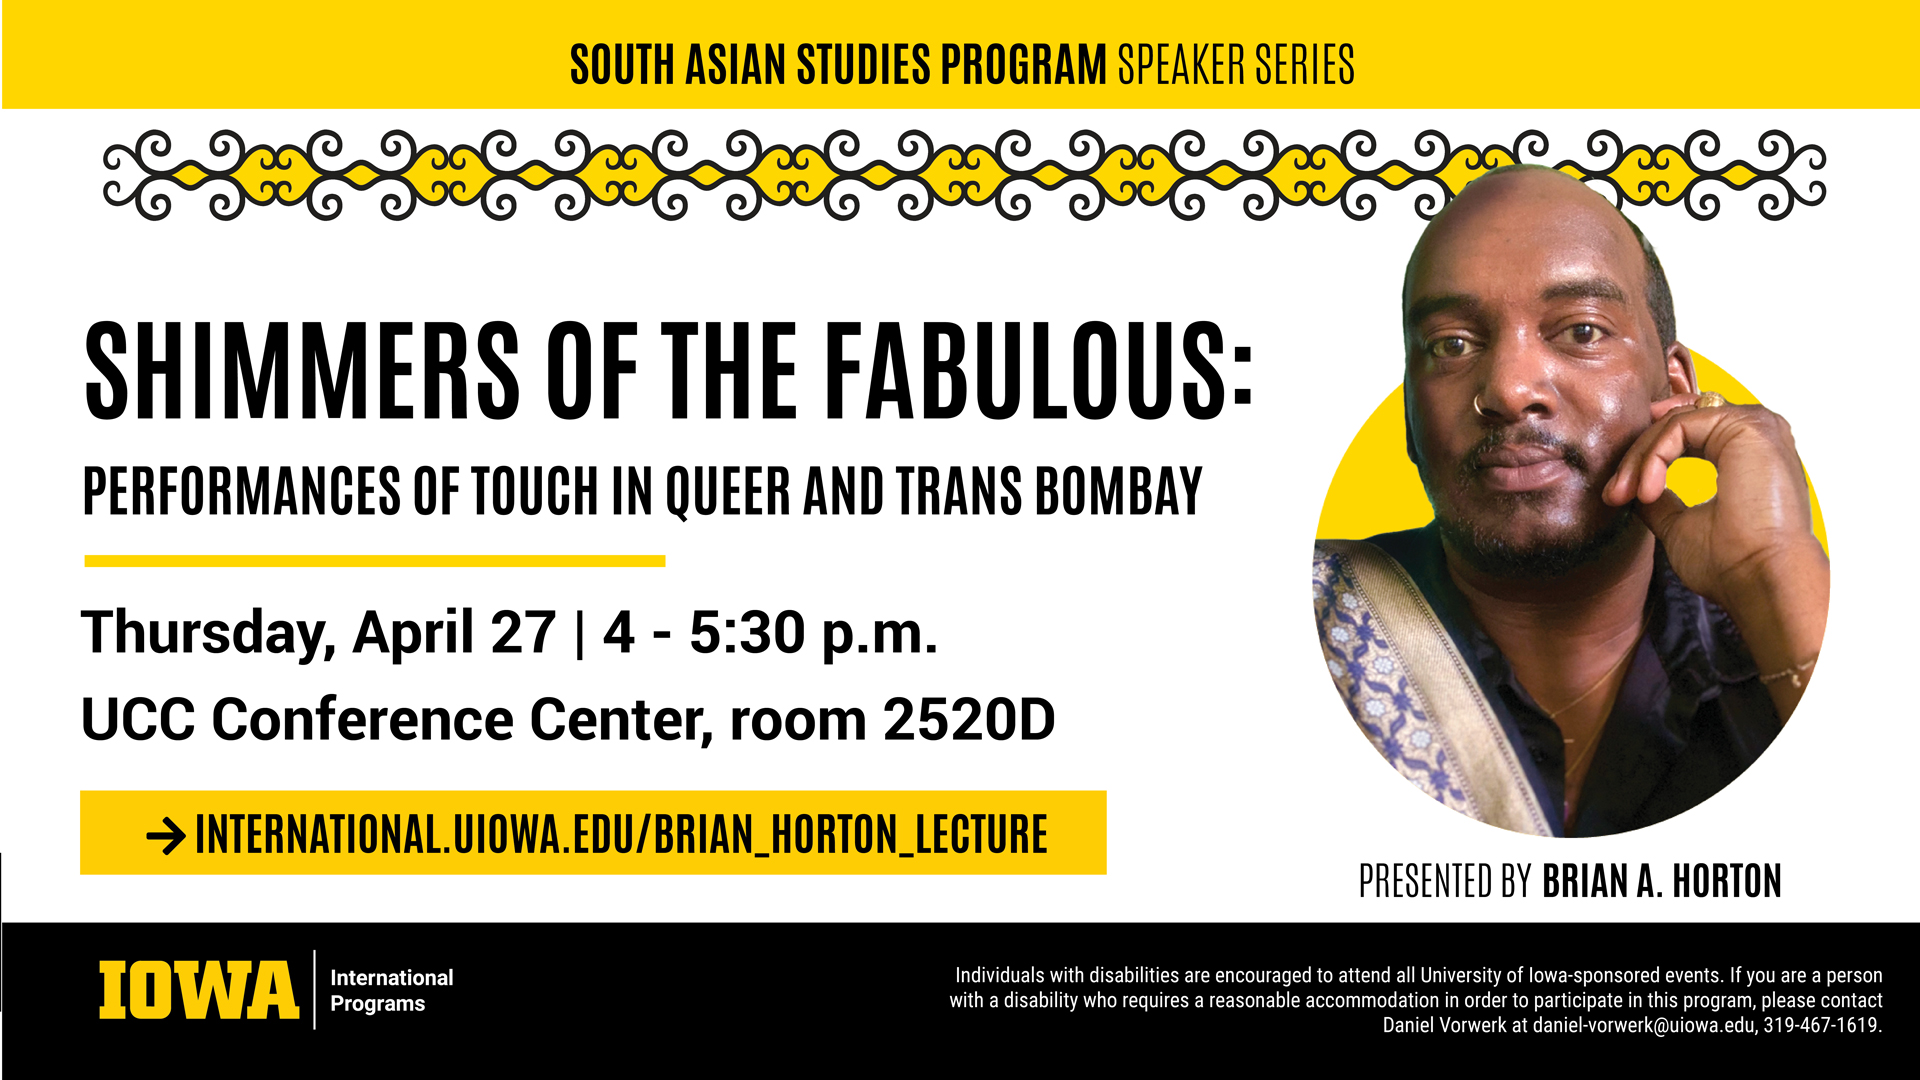 “Shimmers of the Fabulous: Performances of Touch in Queer and Trans Bombay”